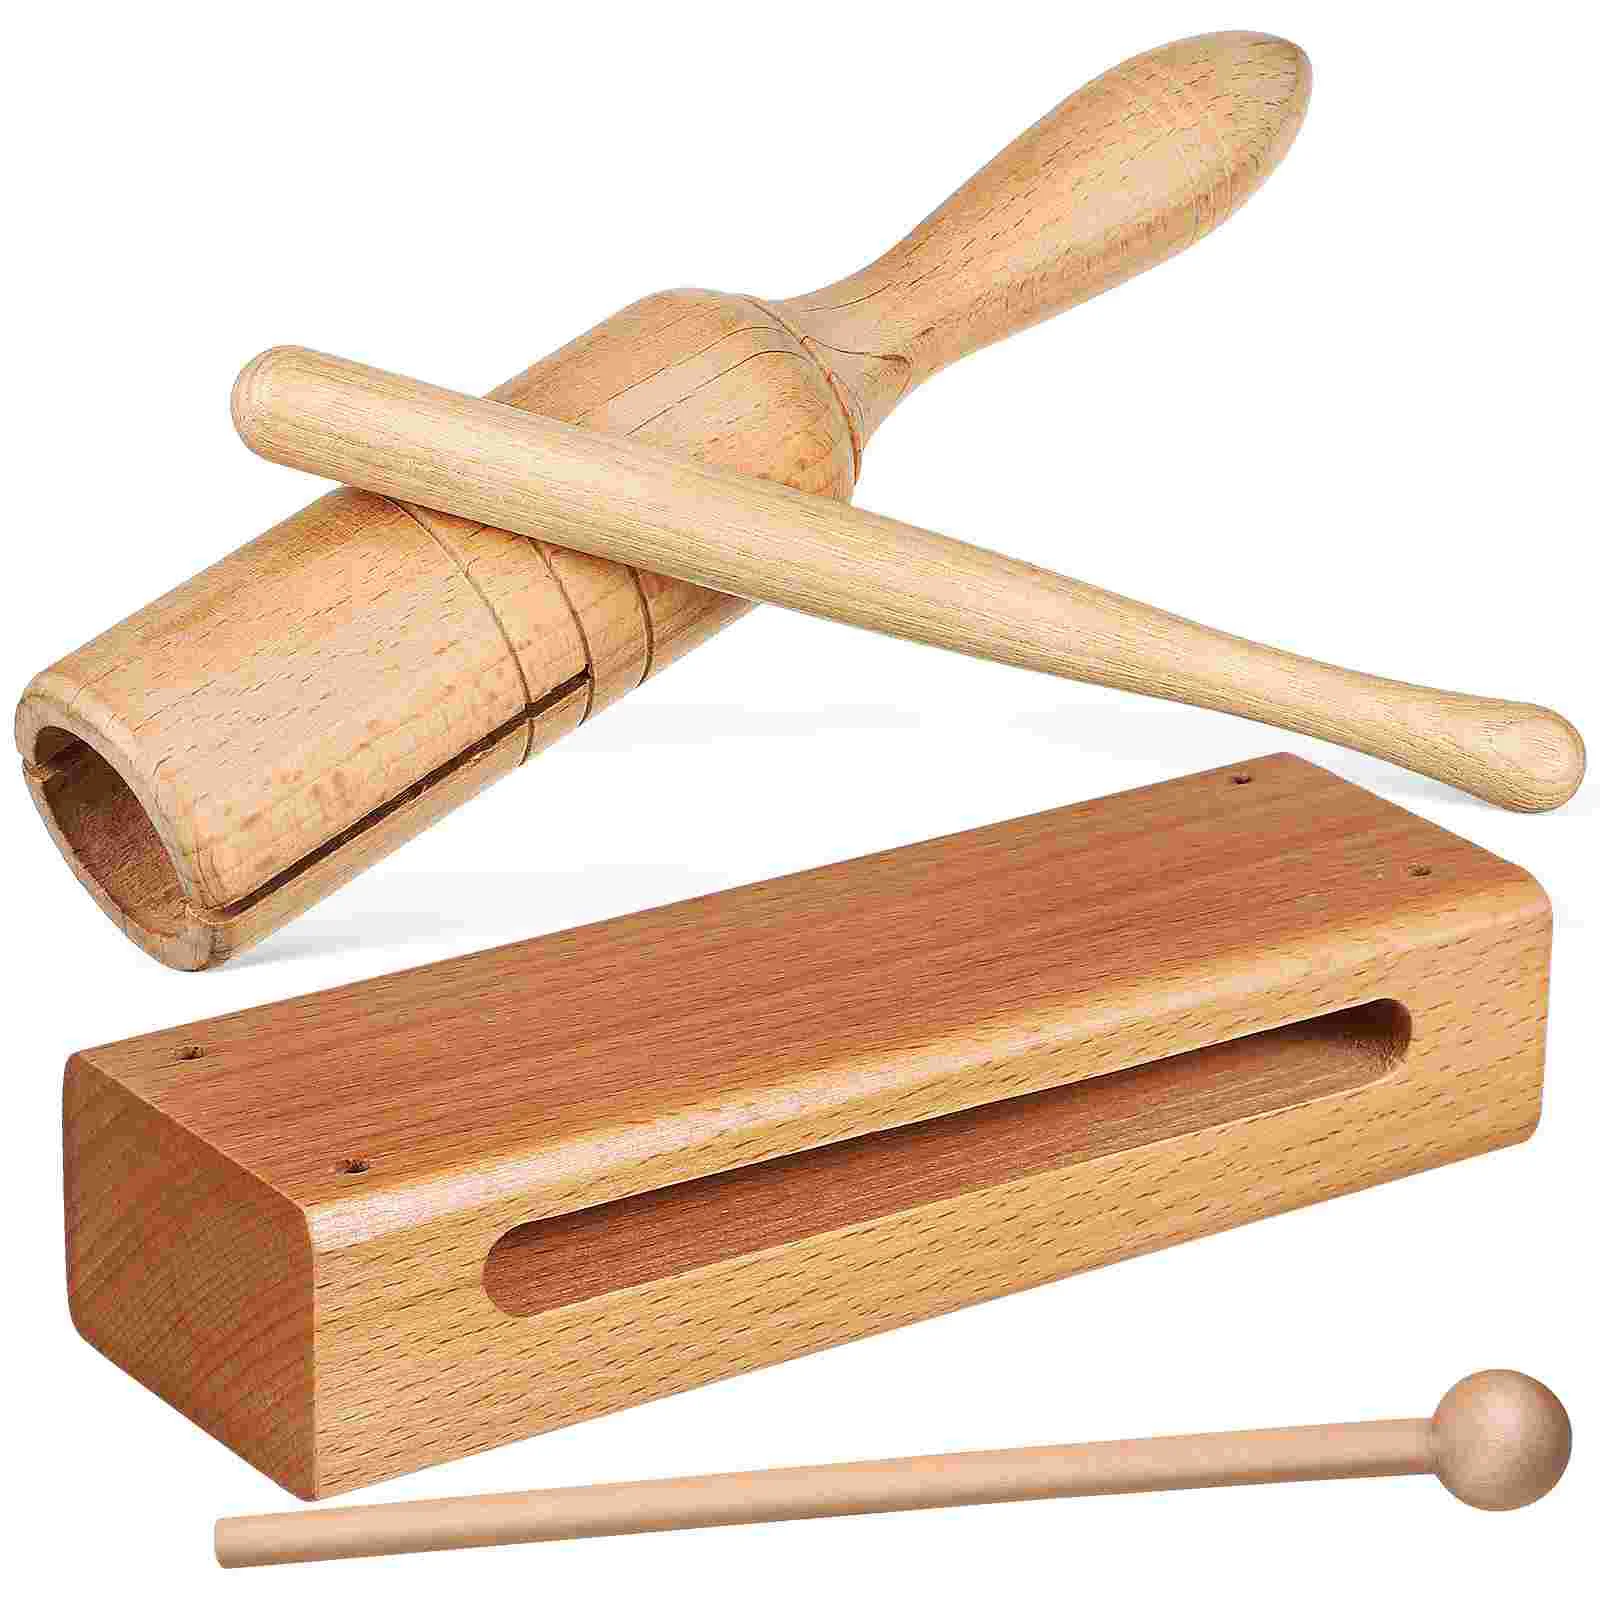 

2 Sets Orff Instrument Handheld Rhythm Wood Blocks Chimes Large Single Tone Wooden Mallets Percussion